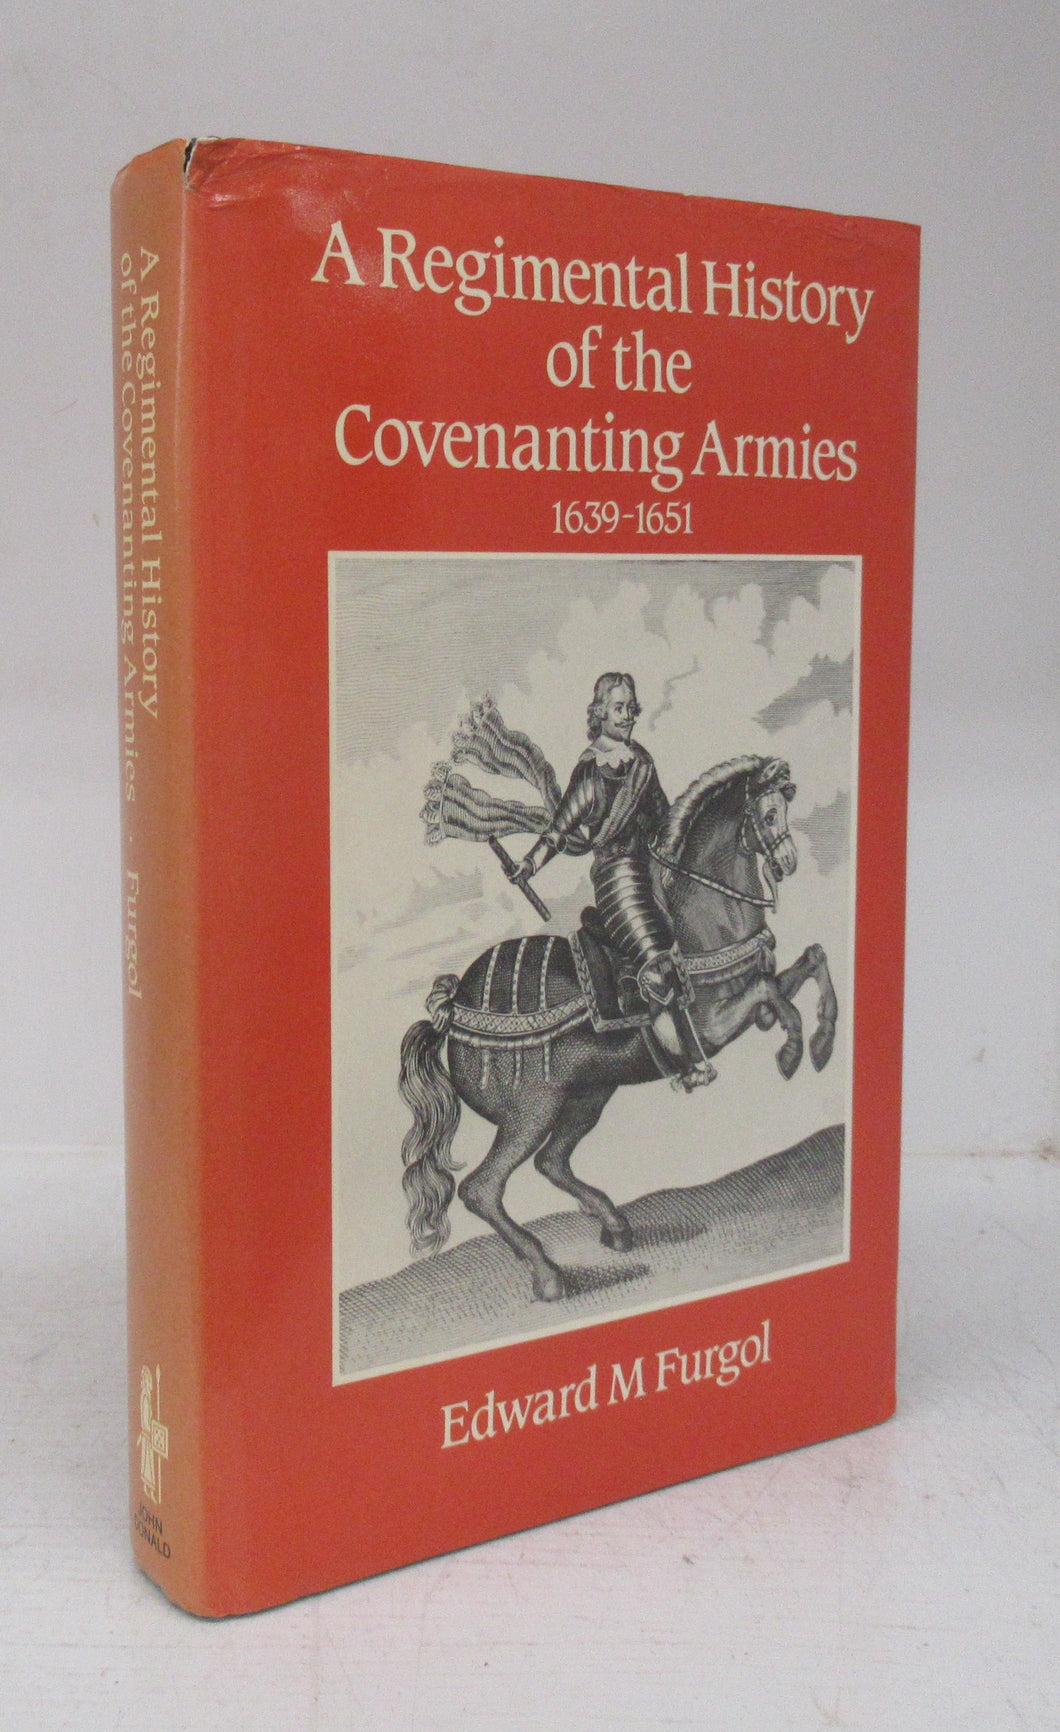 A Regimental History of the Covenanting Armies 1639-1651